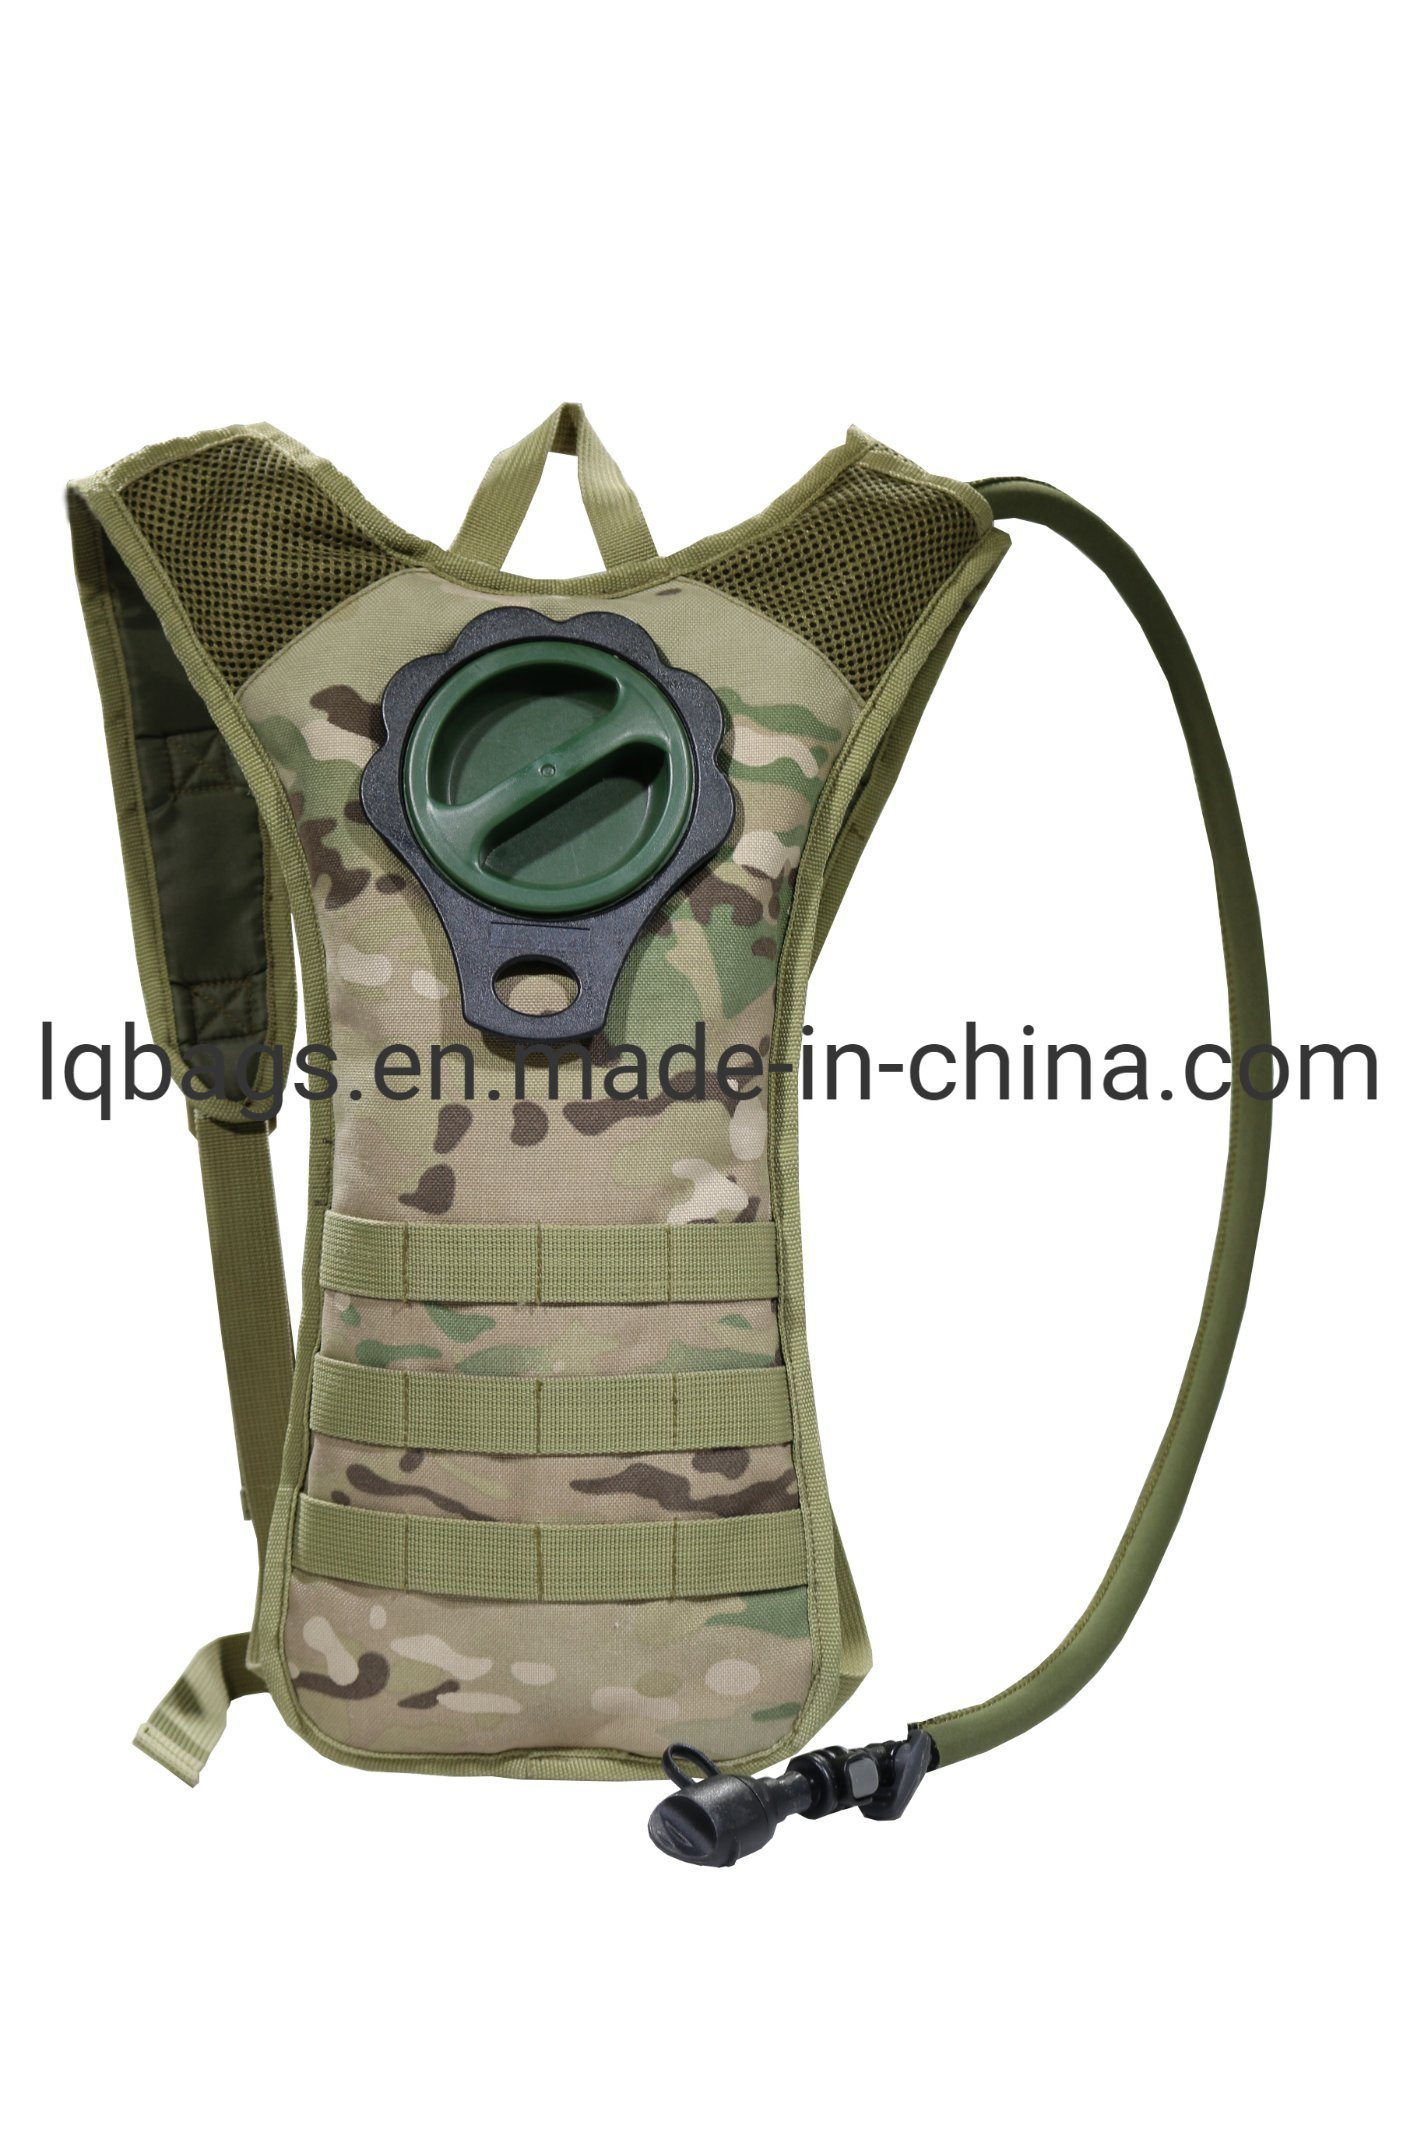 Tactical Hydration Backpack Molle Pack with Water Bladder for Cycling